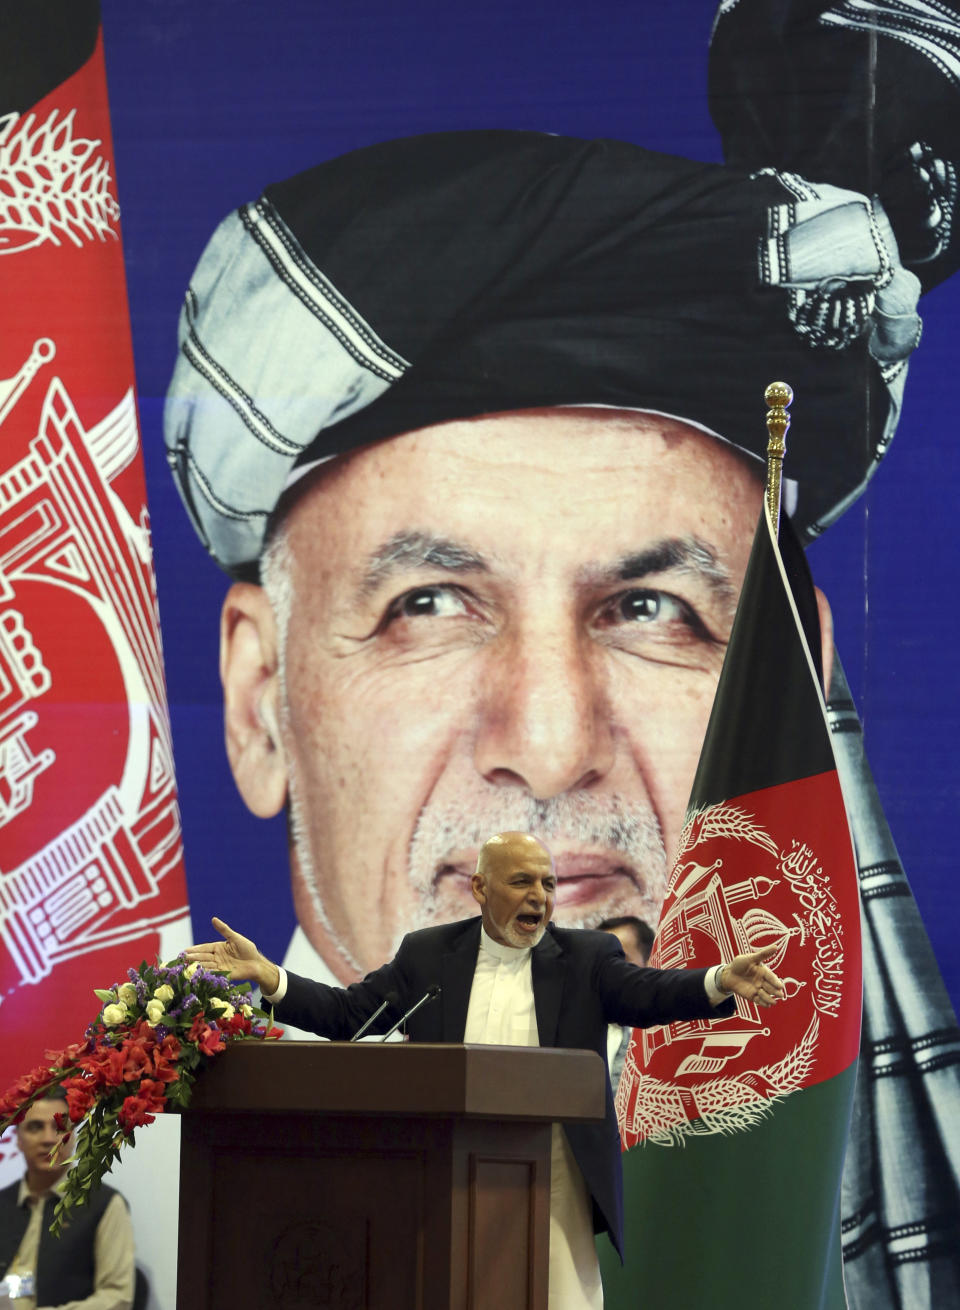 Afghan presidential candidate Ashraf Ghani speaks during the first day of campaigning in Kabul, Afghanistan, Sunday, July 28, 2019. Sunday marked the first day of campaigning for presidential elections scheduled for Sept. 28. President Ghani is seeking a second term on promises of ending the 18-year war but has been largely sidelined over the past year as the U.S. has negotiated directly with the Taliban. (AP Photo/Rahmat Gul)